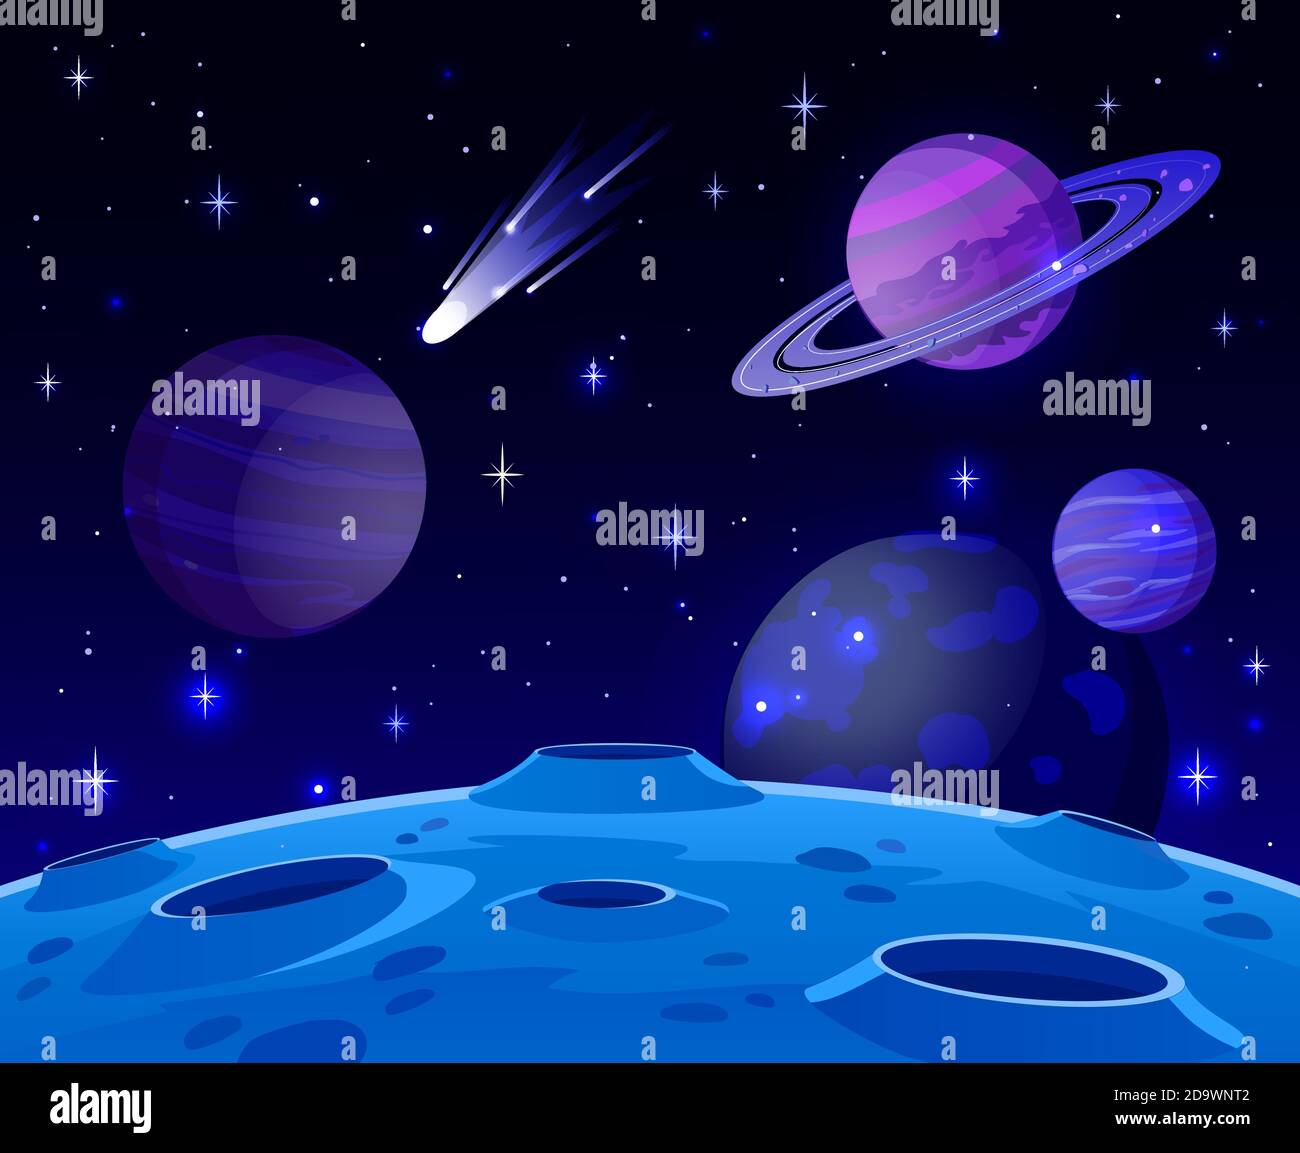 Cartoon space landscape. Cosmic planet surface, futuristic celestial bodies landscape, galaxy stars and comets view vector background illustration Stock Vector